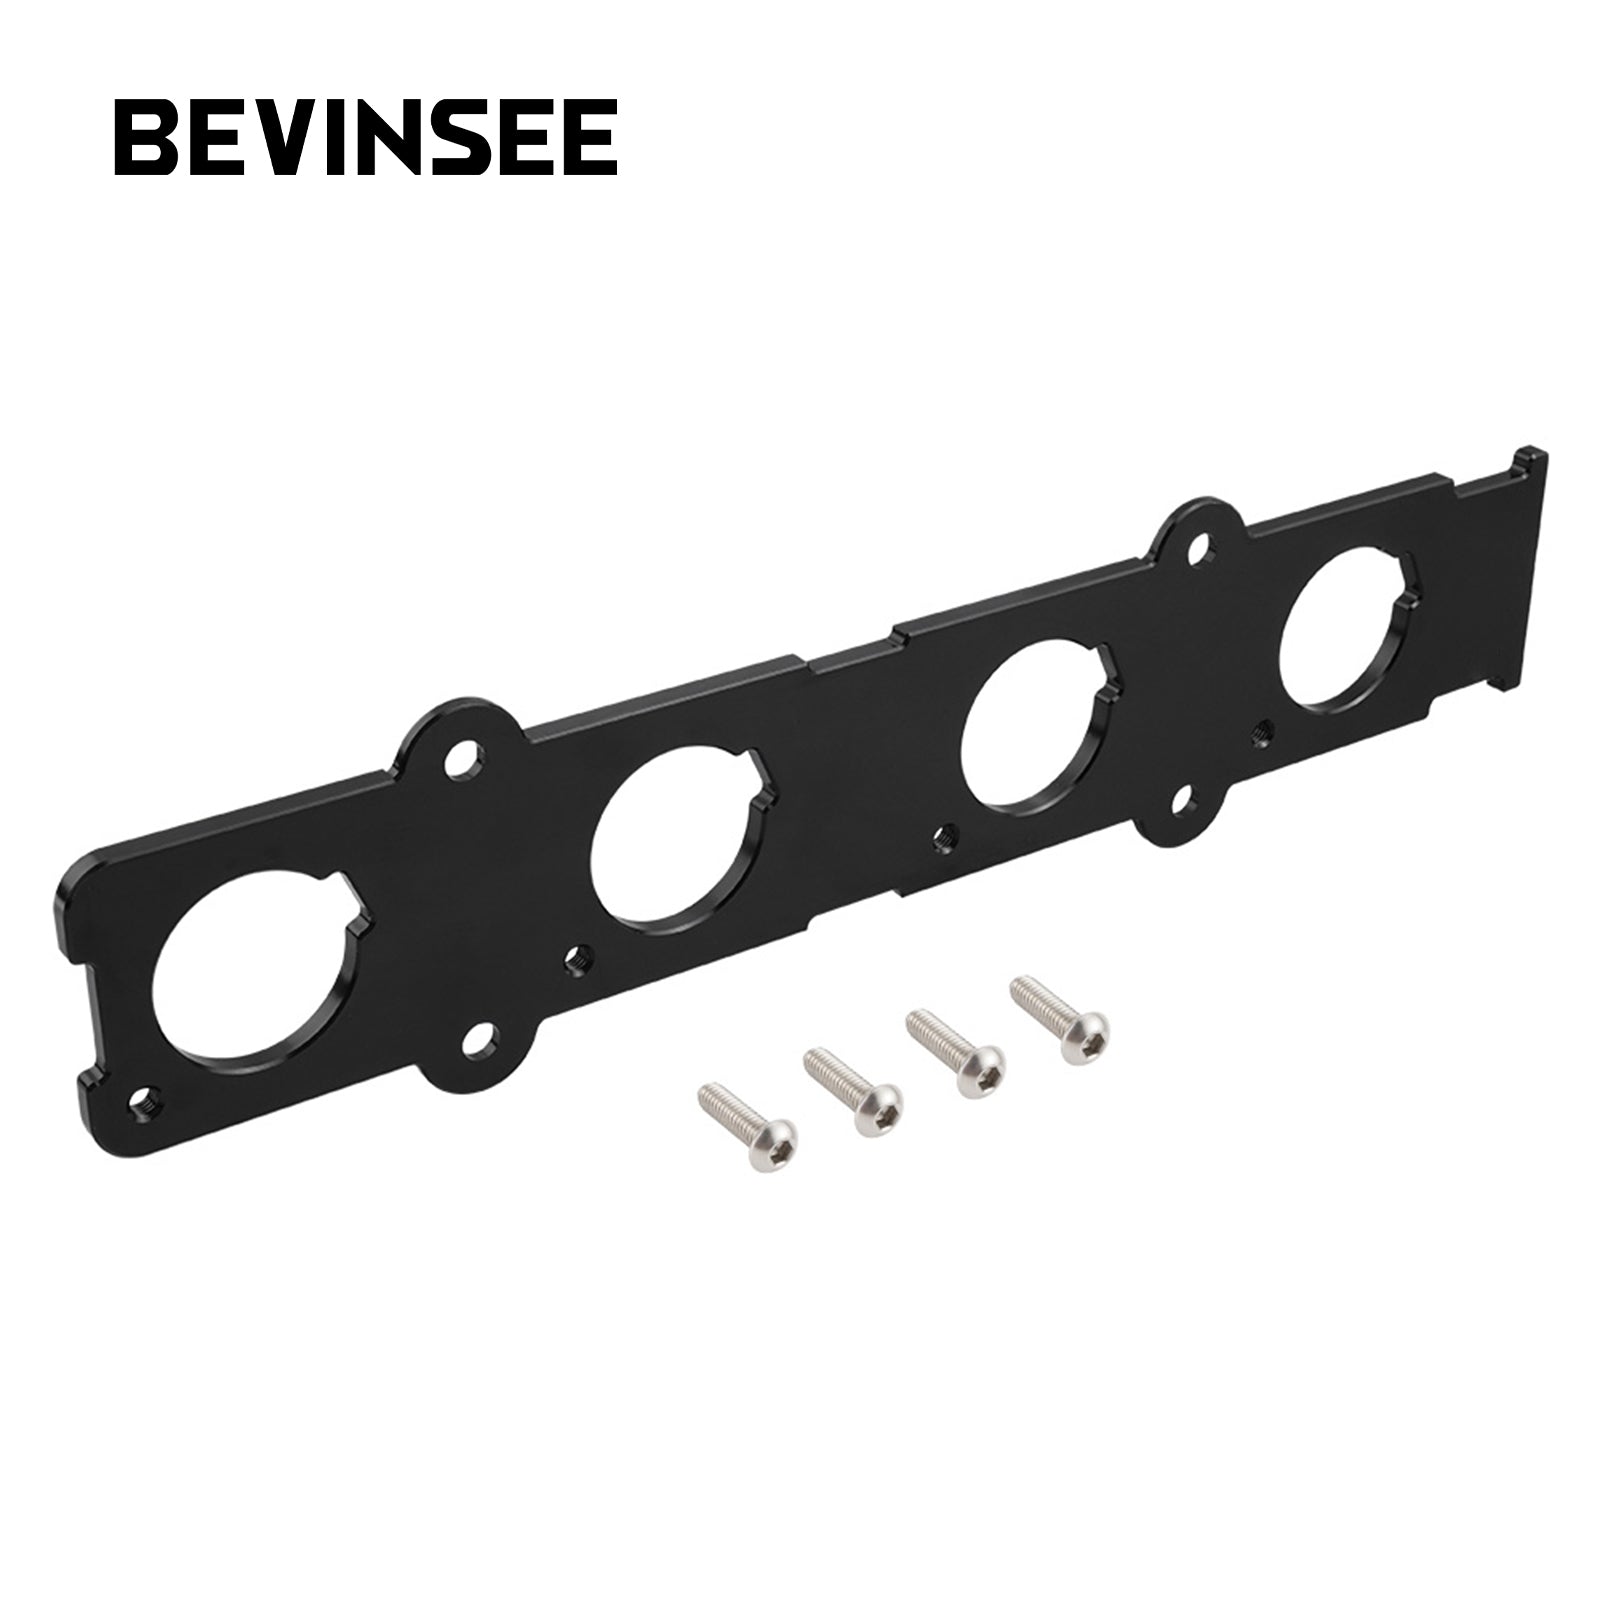 BEVINSEE B-Series VTEC Coil On Plug COP Adapter Plate for Honda for Acura B16 B18 Engine